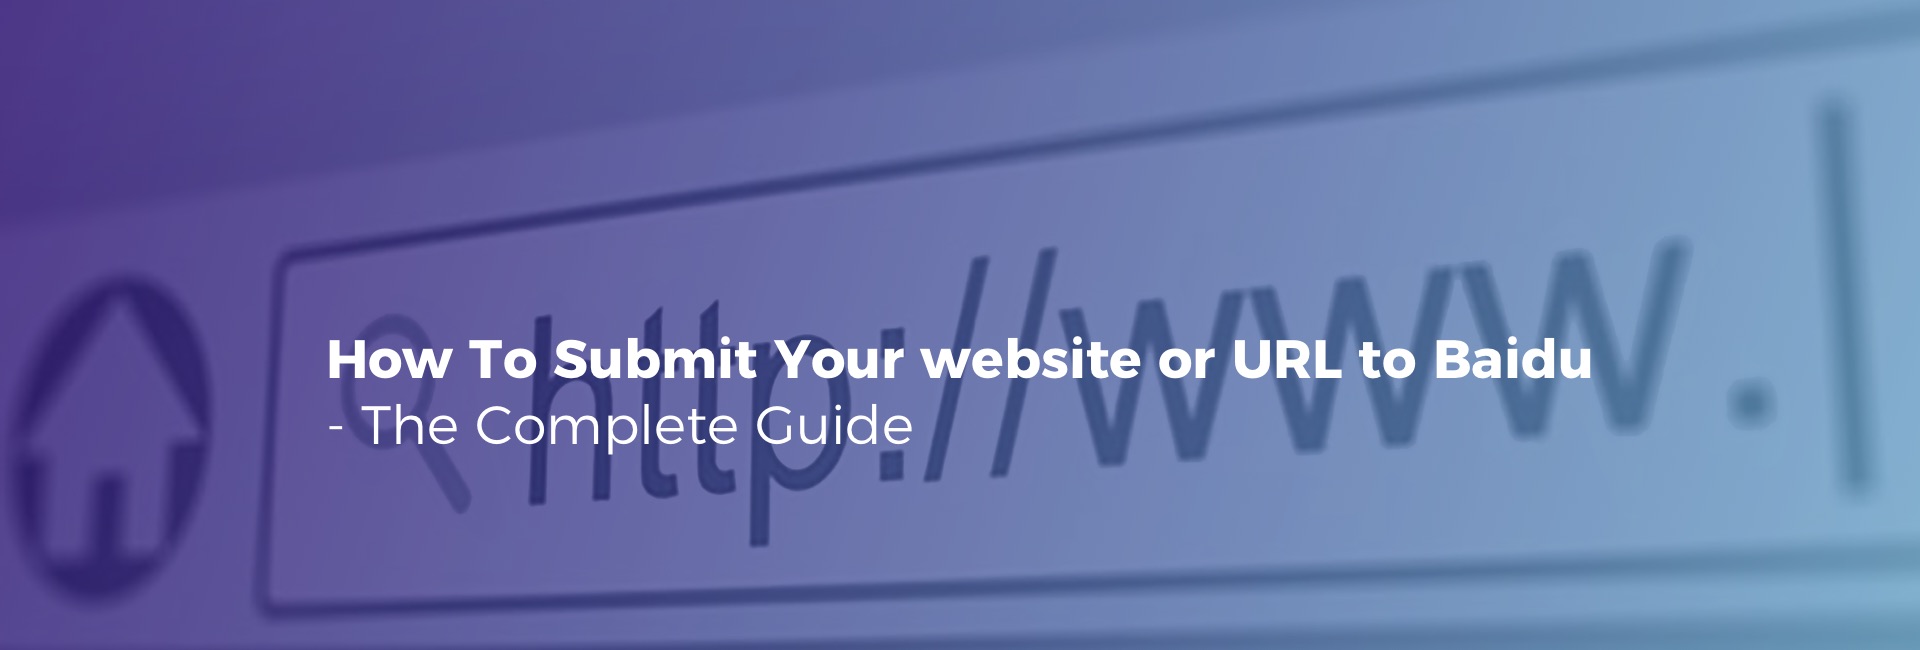 How to submit website to Baidu complete Guide